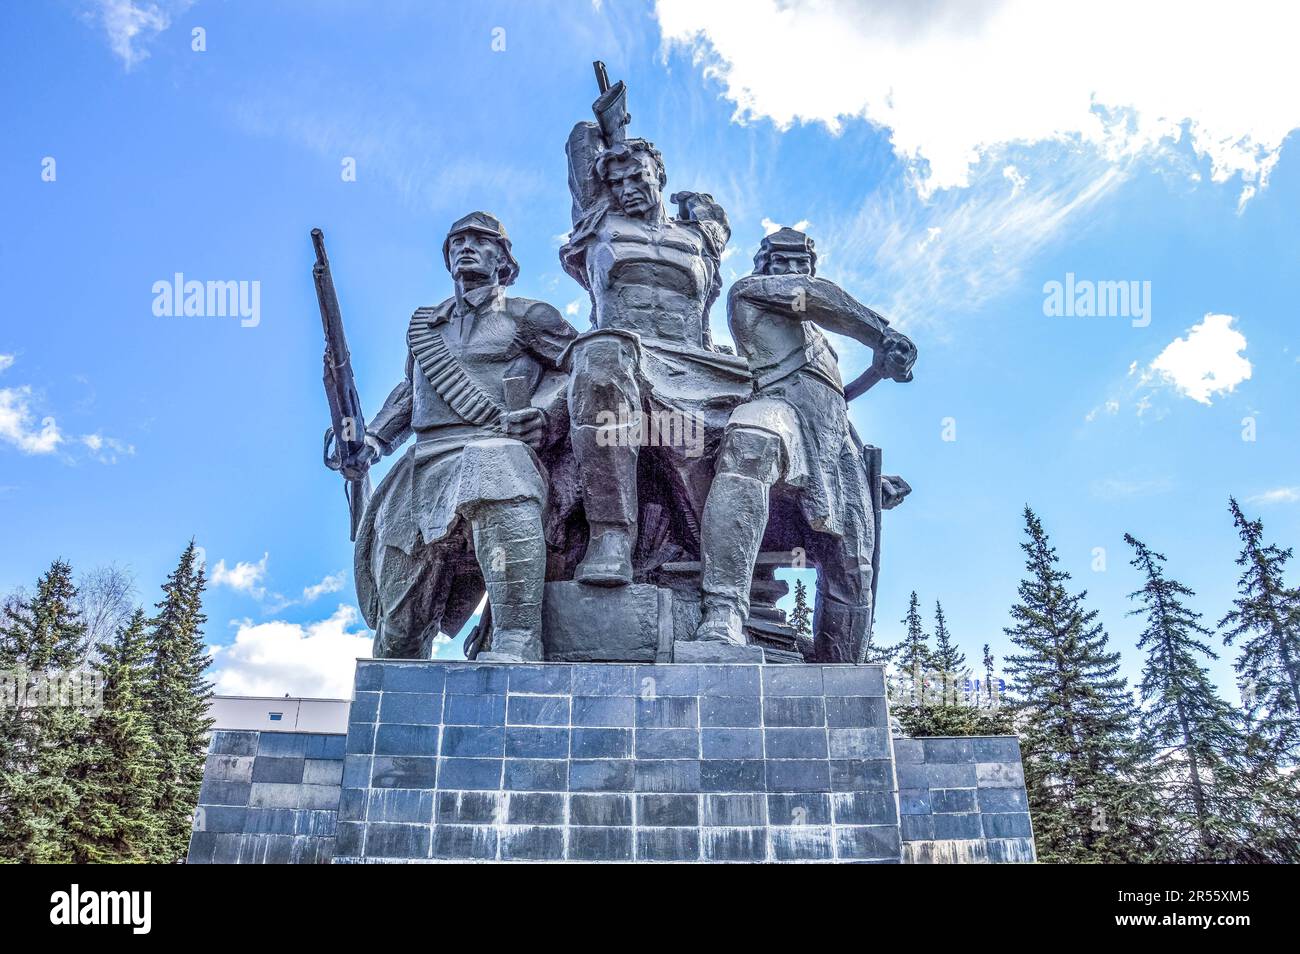 Ufa, Republic of Bashkortostan, Russia. 04.30.2018. Monument to the heroes of the October Revolution and the Civil War Stock Photo